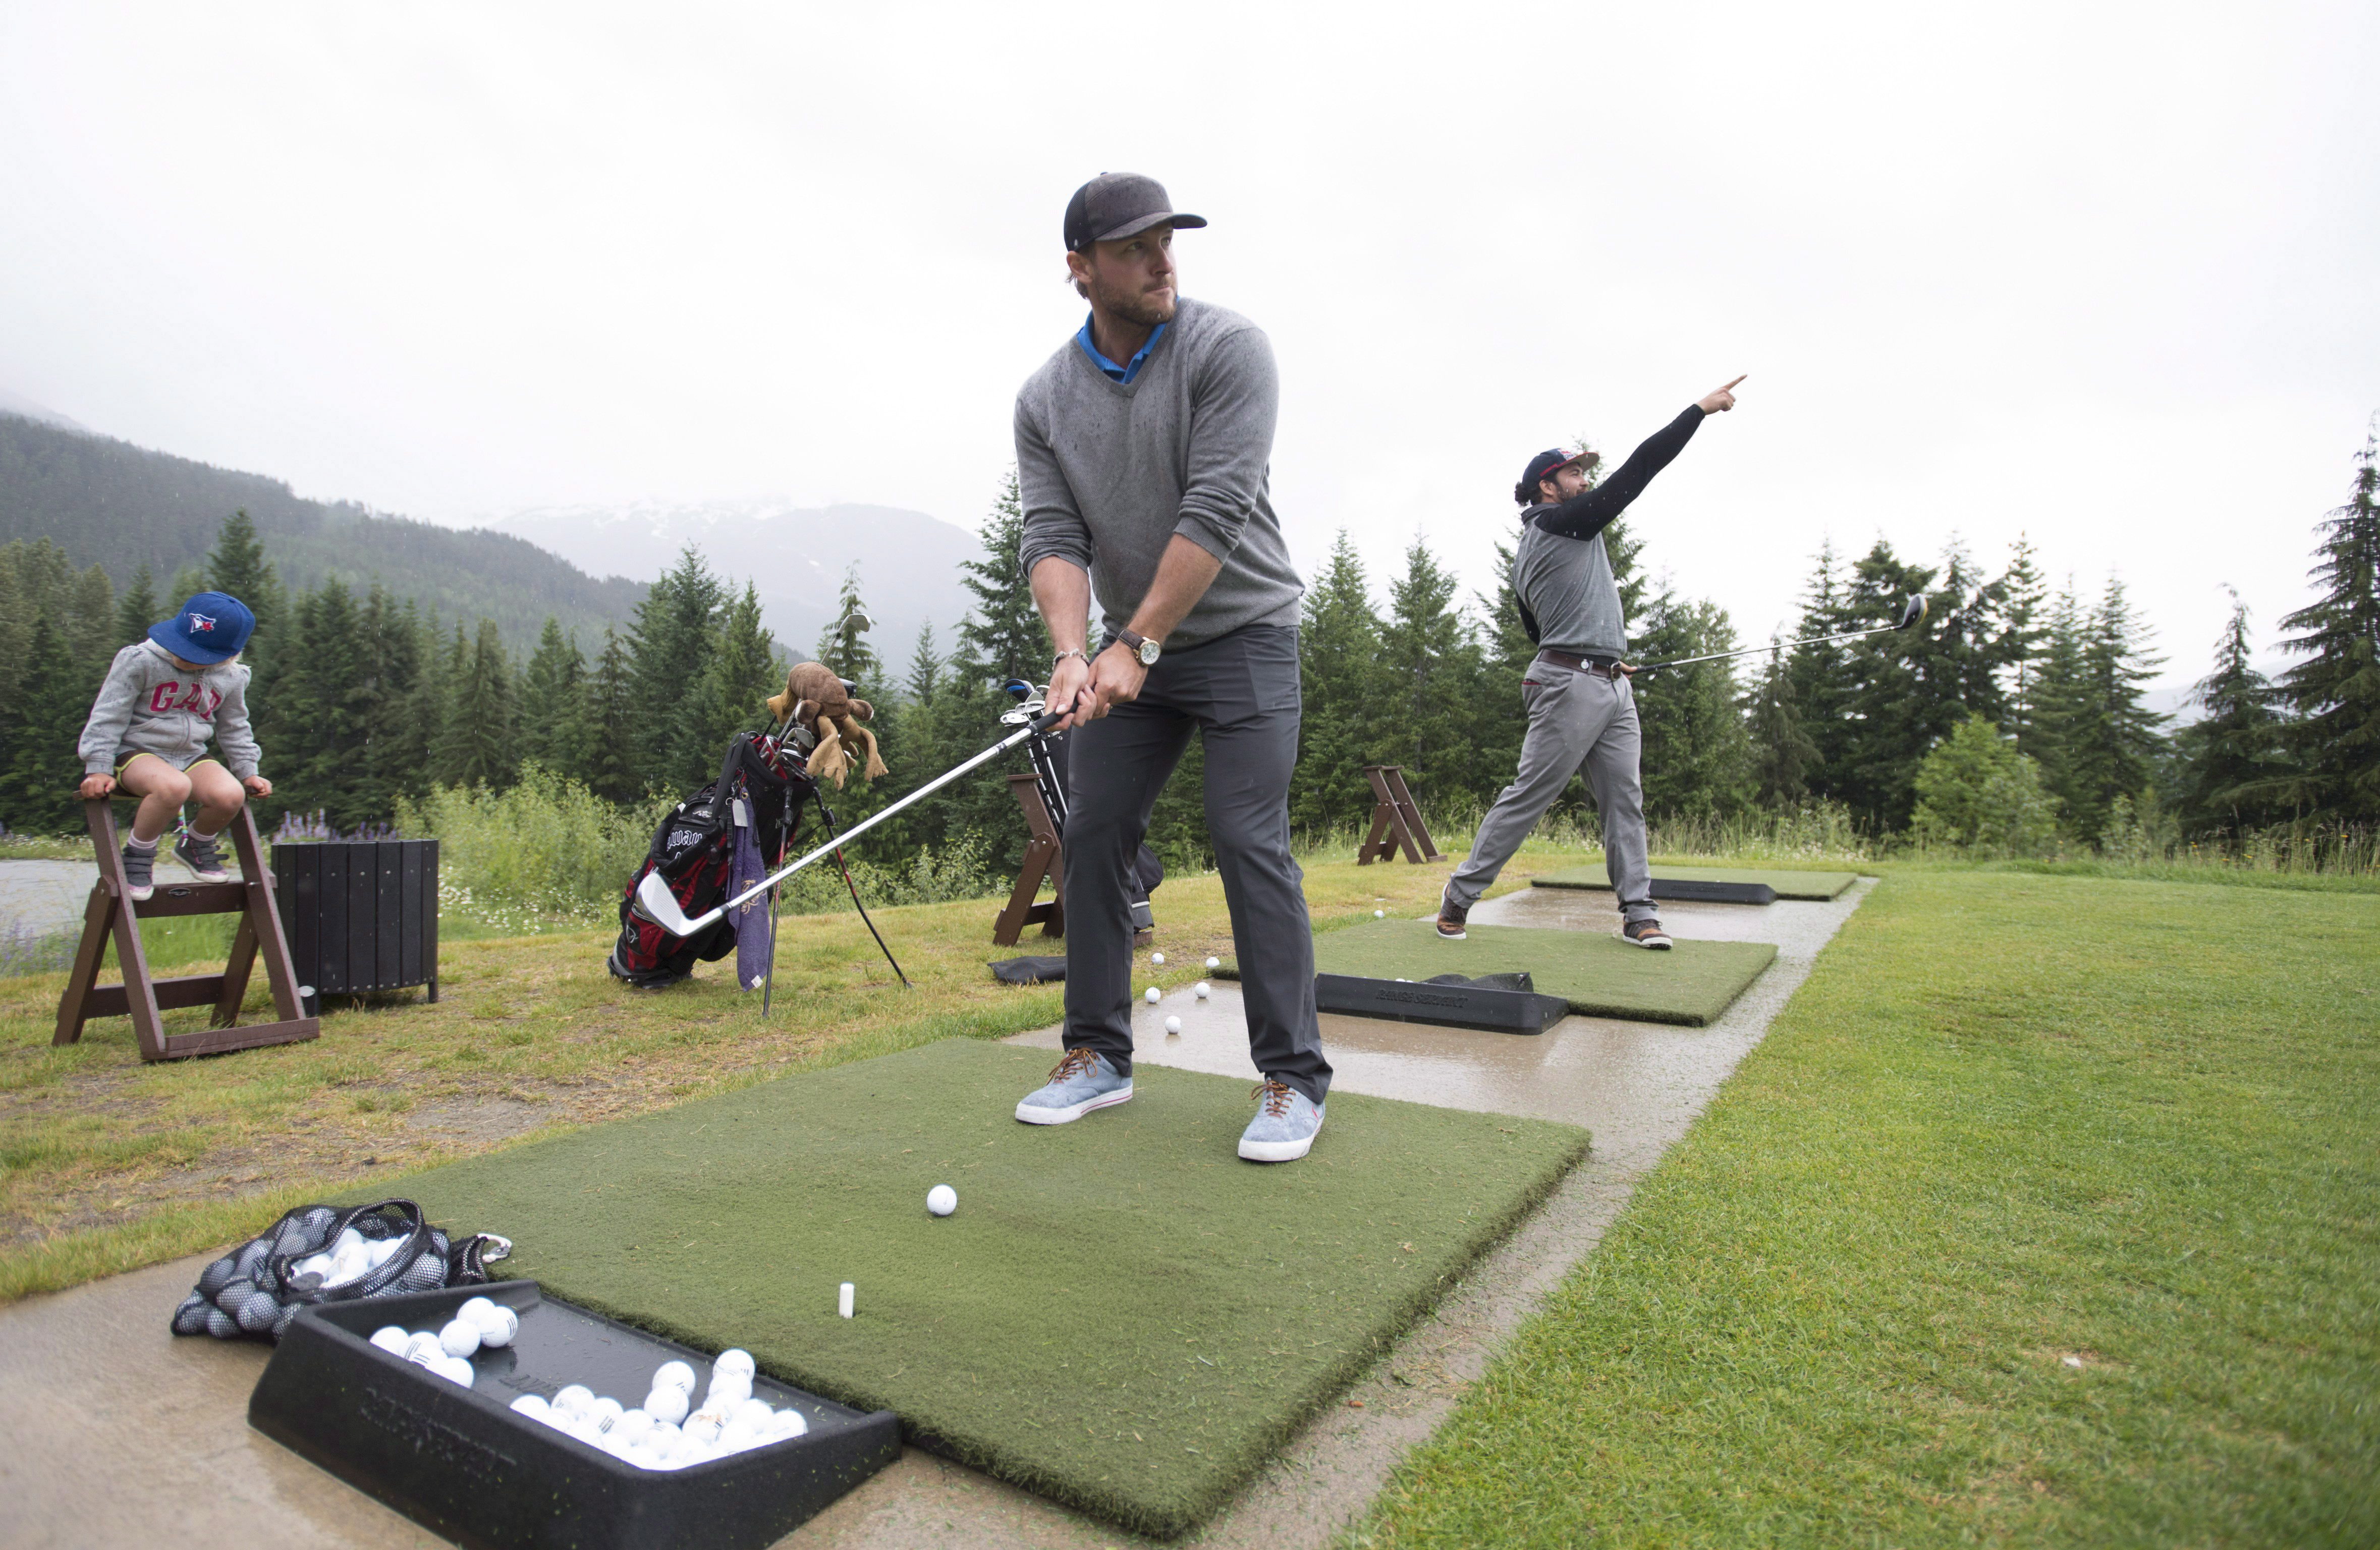 Bobsled athletes Chris Spring, right, and Justin Kripps hit shots at the Fairmont driving range in Whistler, B.C., Wednesday, June, 8, 2016. Spring and Kripps have taken up golf this summer as part of their training program, with a goal of sharpening focus and improving mental toughness. THE CANADIAN PRESS/Jonathan Hayward